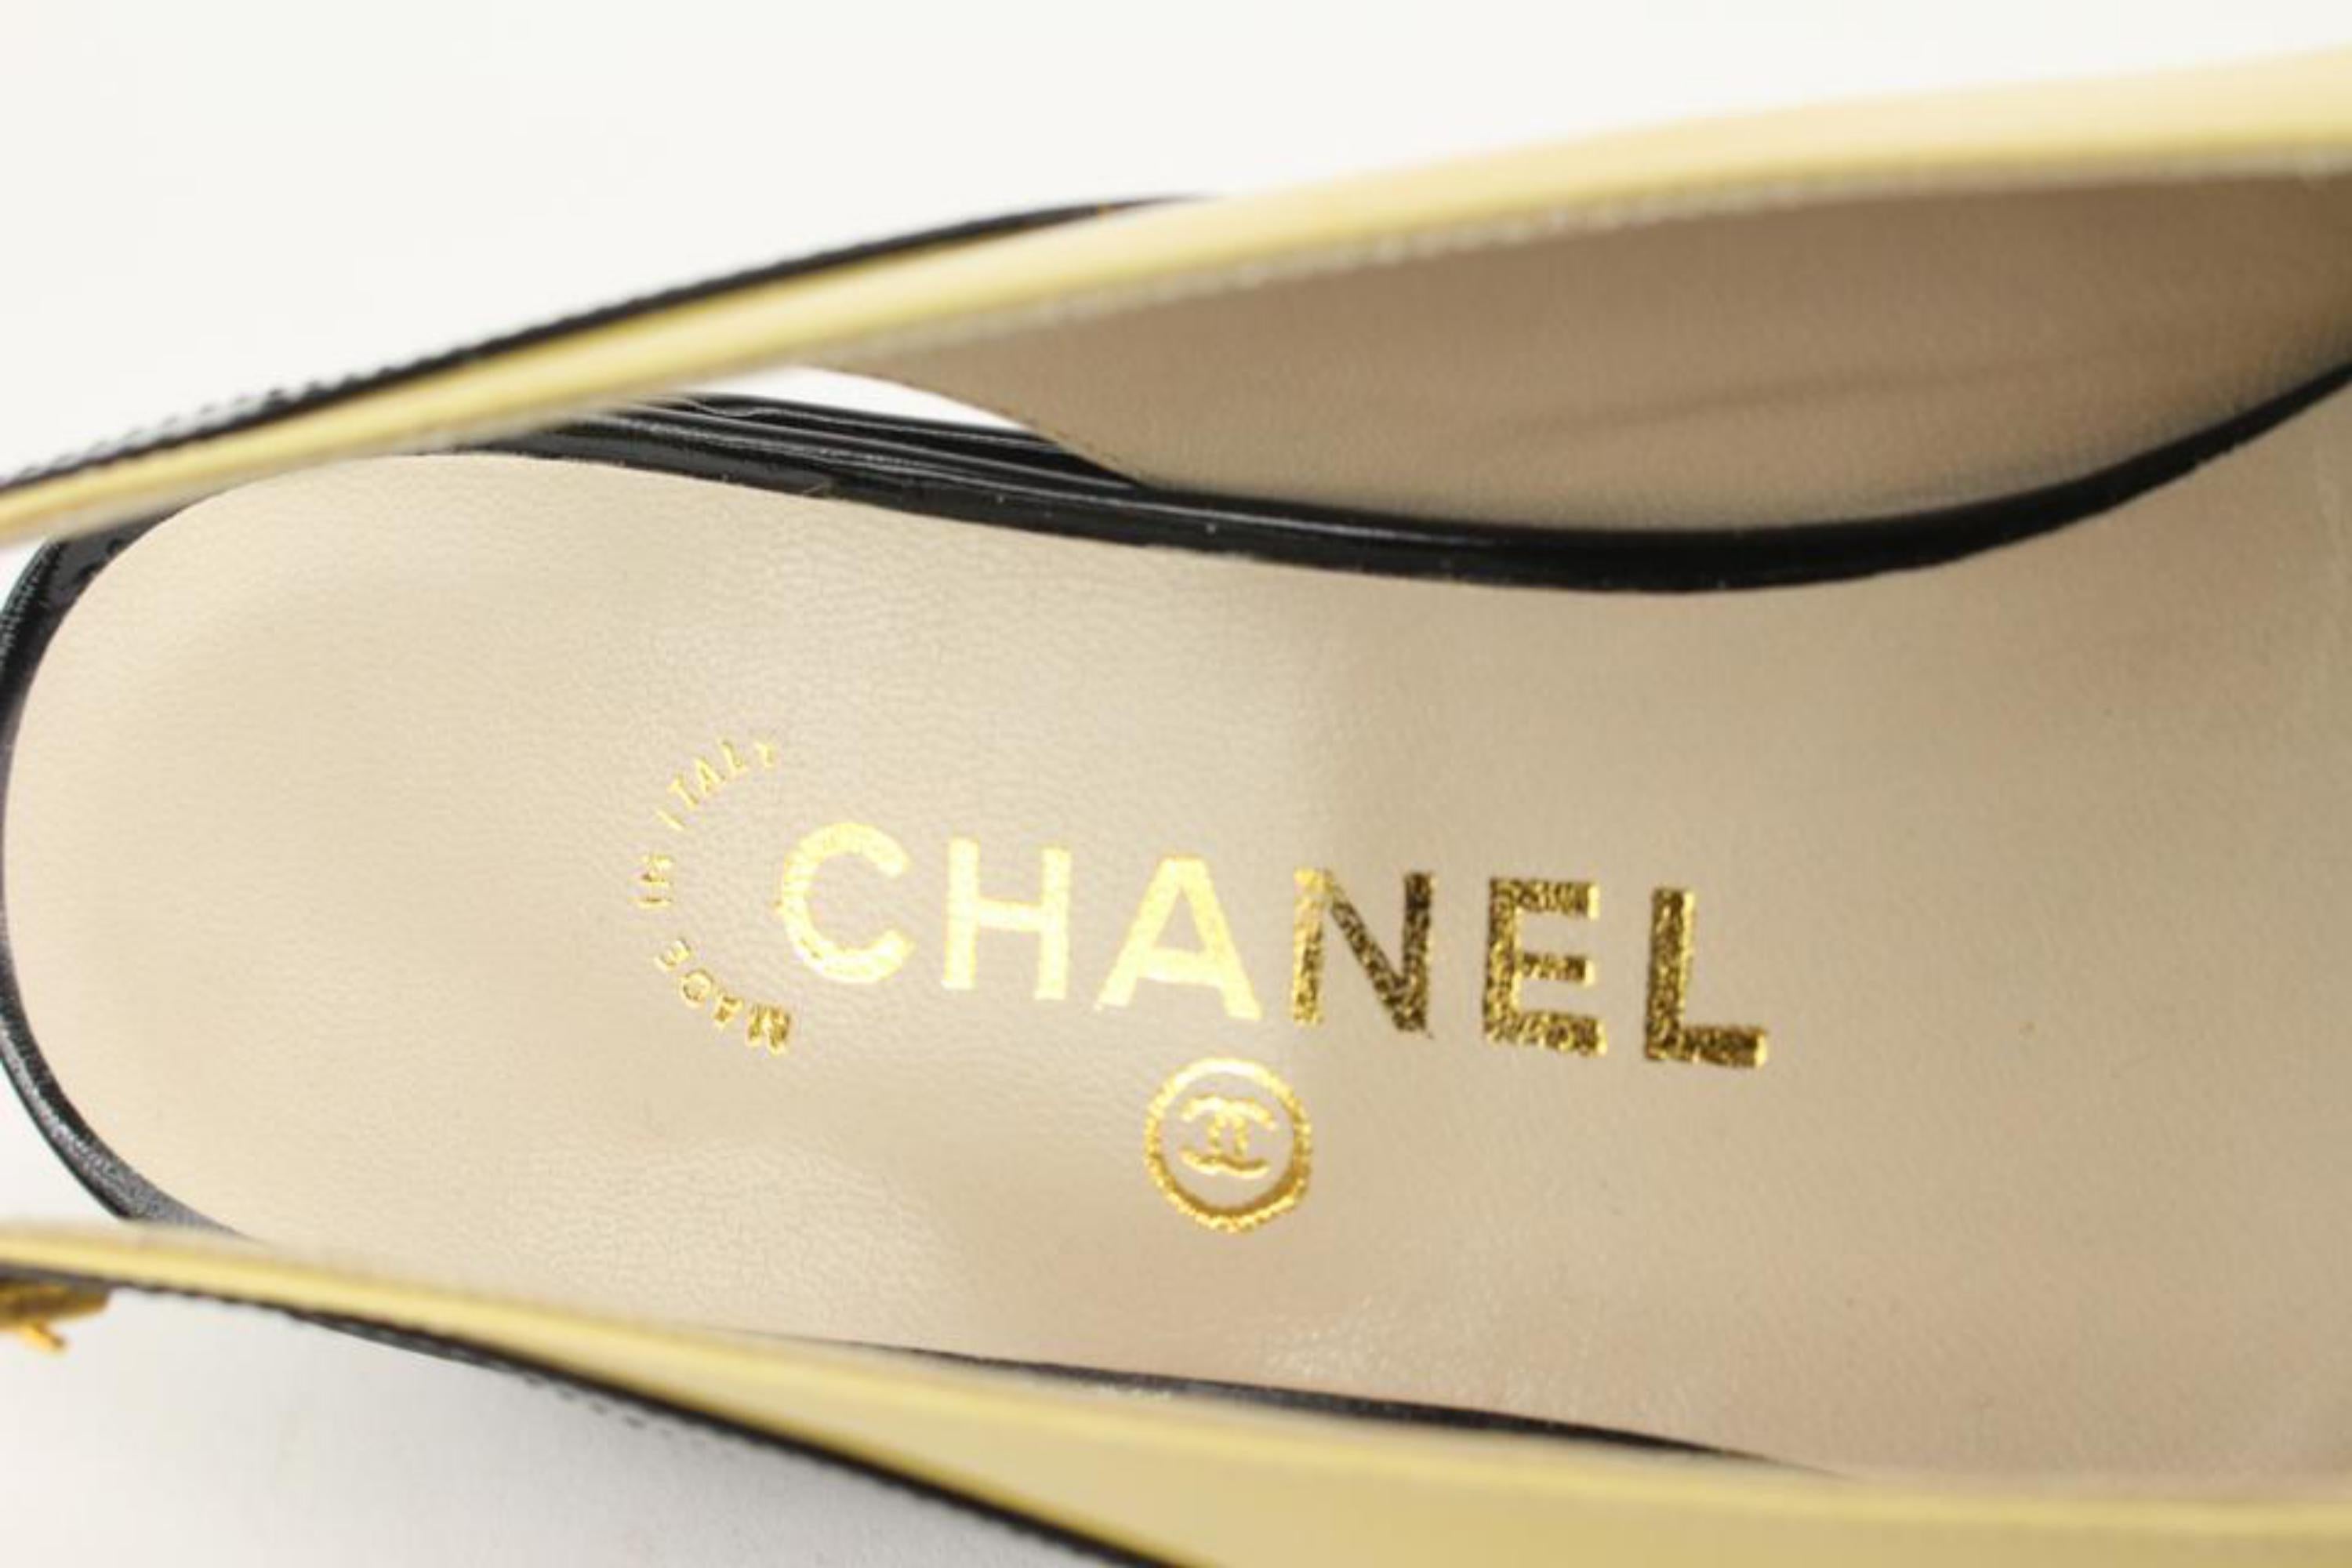 Chanel Ultra Rare 1998 98C New in Box Sz 41 Two Tone Kitten Heels 127c32 For Sale 6